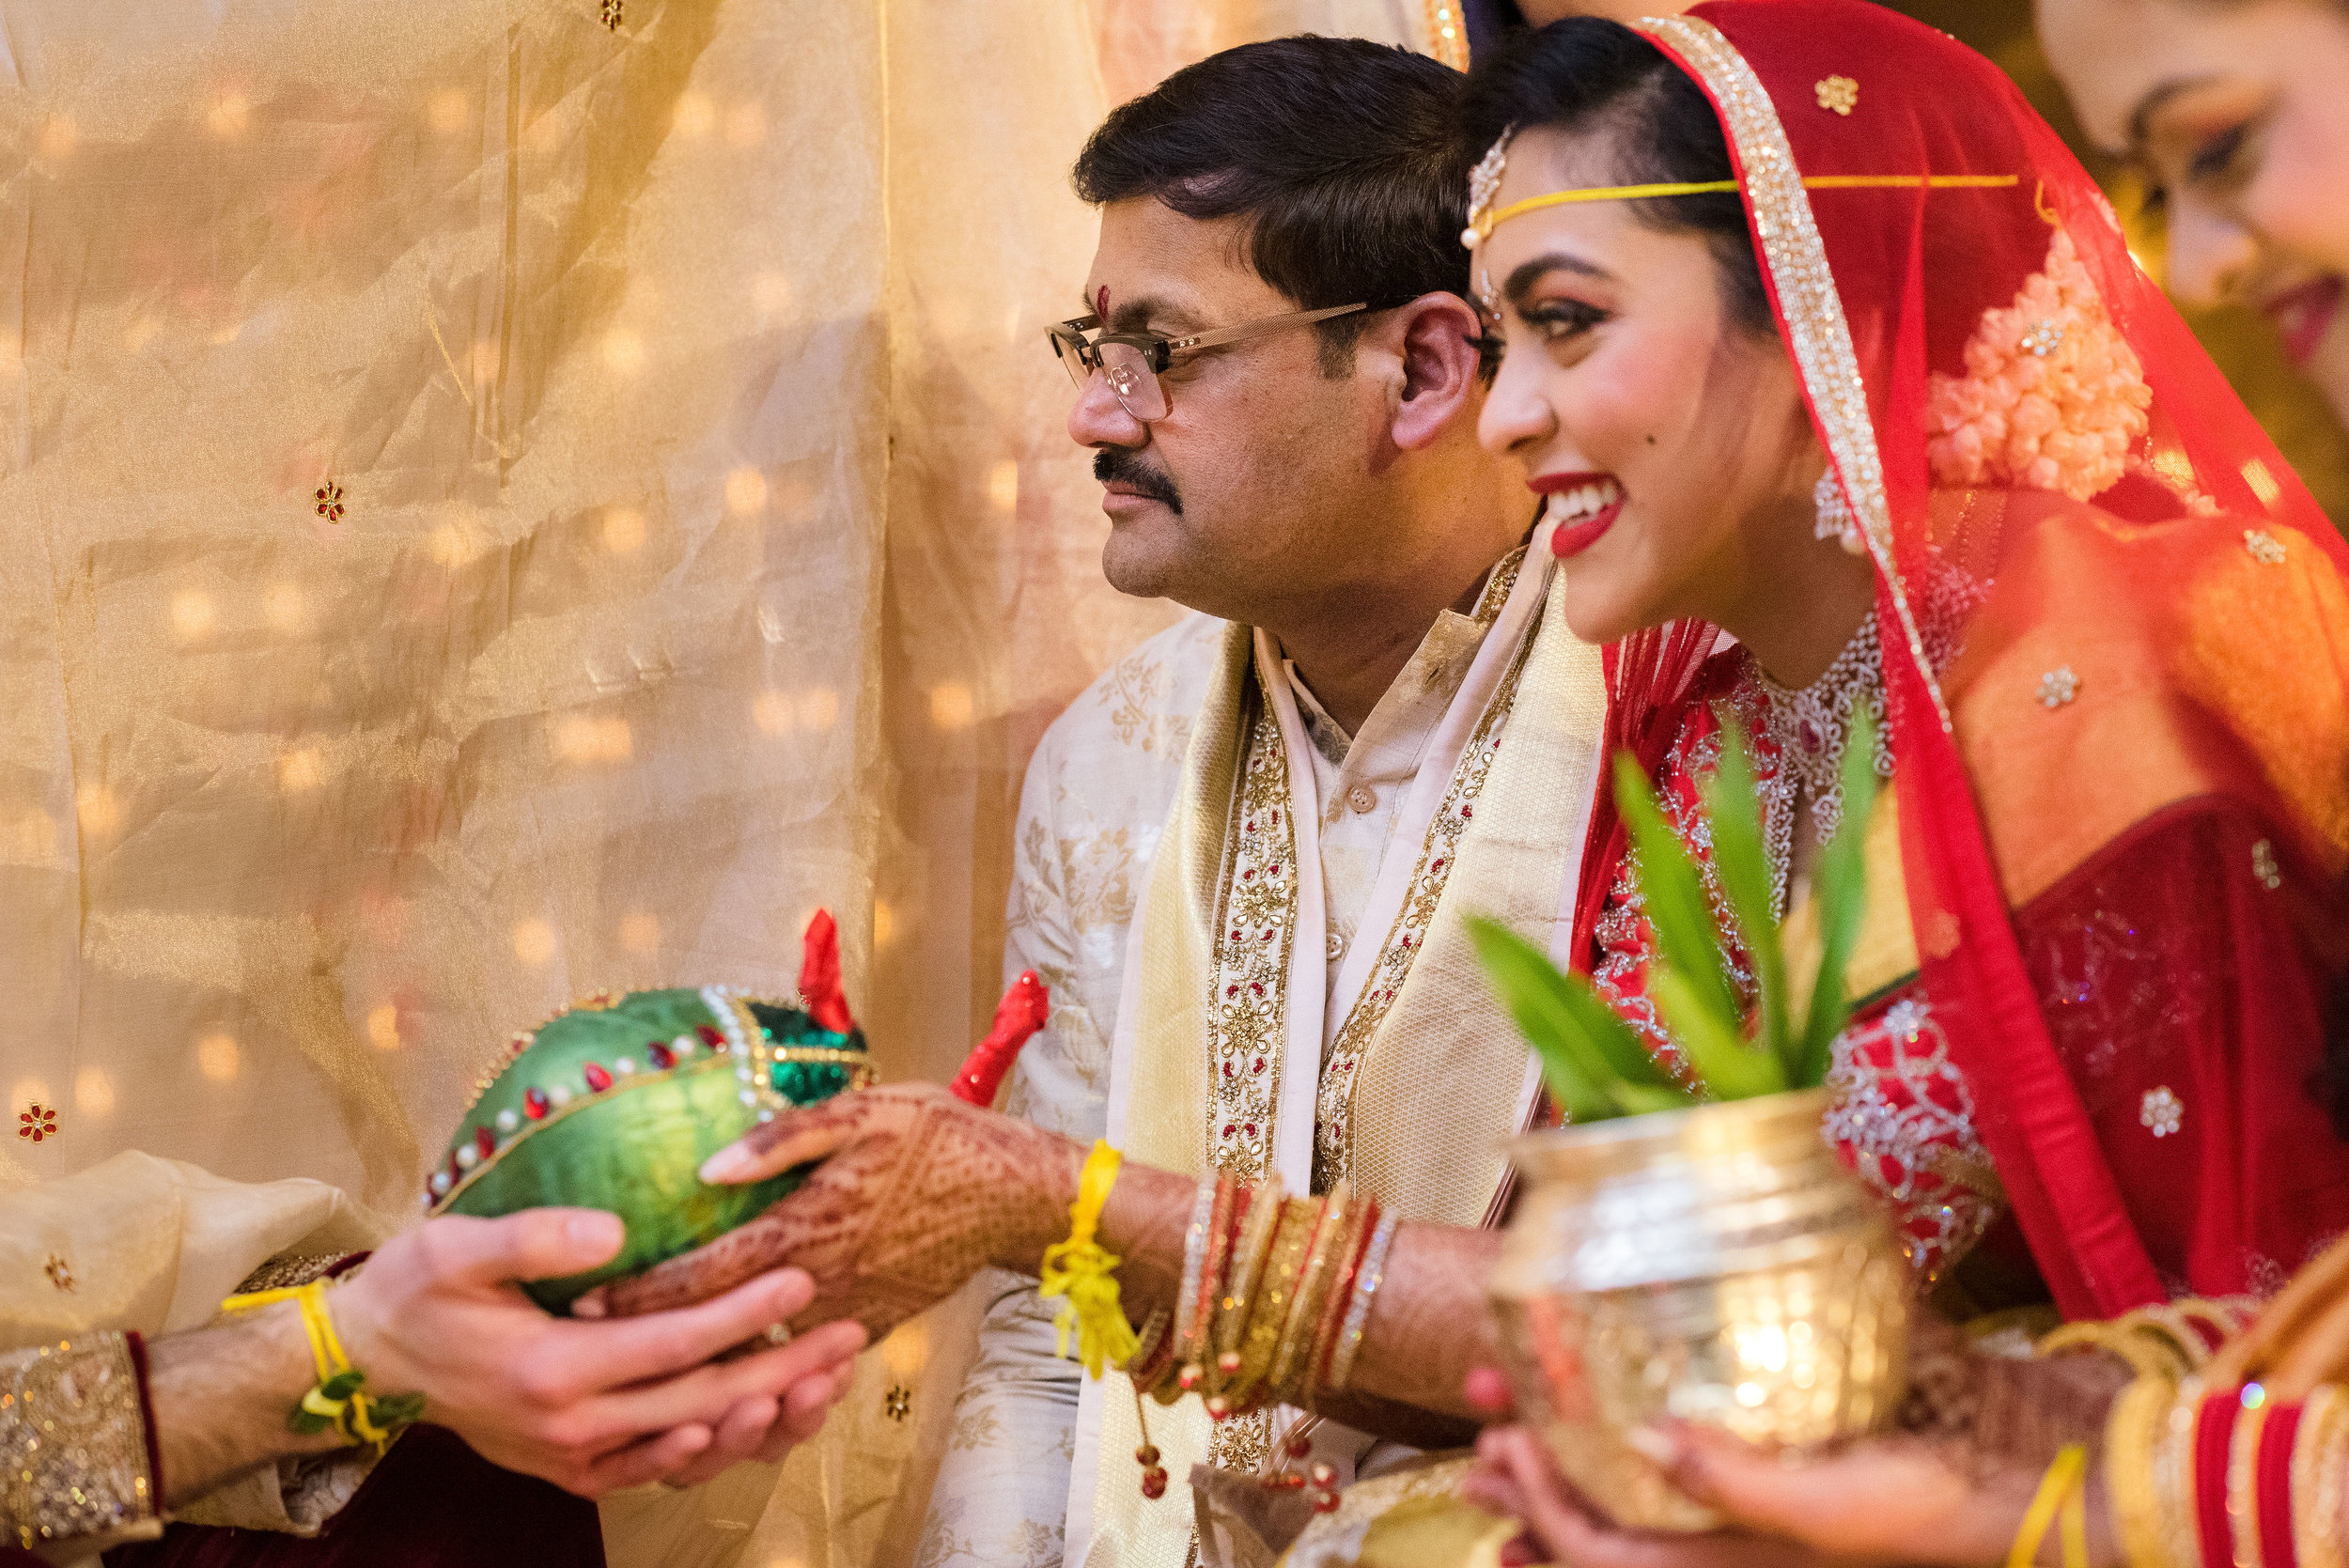 INDIAN WEDDING BRIDE AND FATHER.JPG